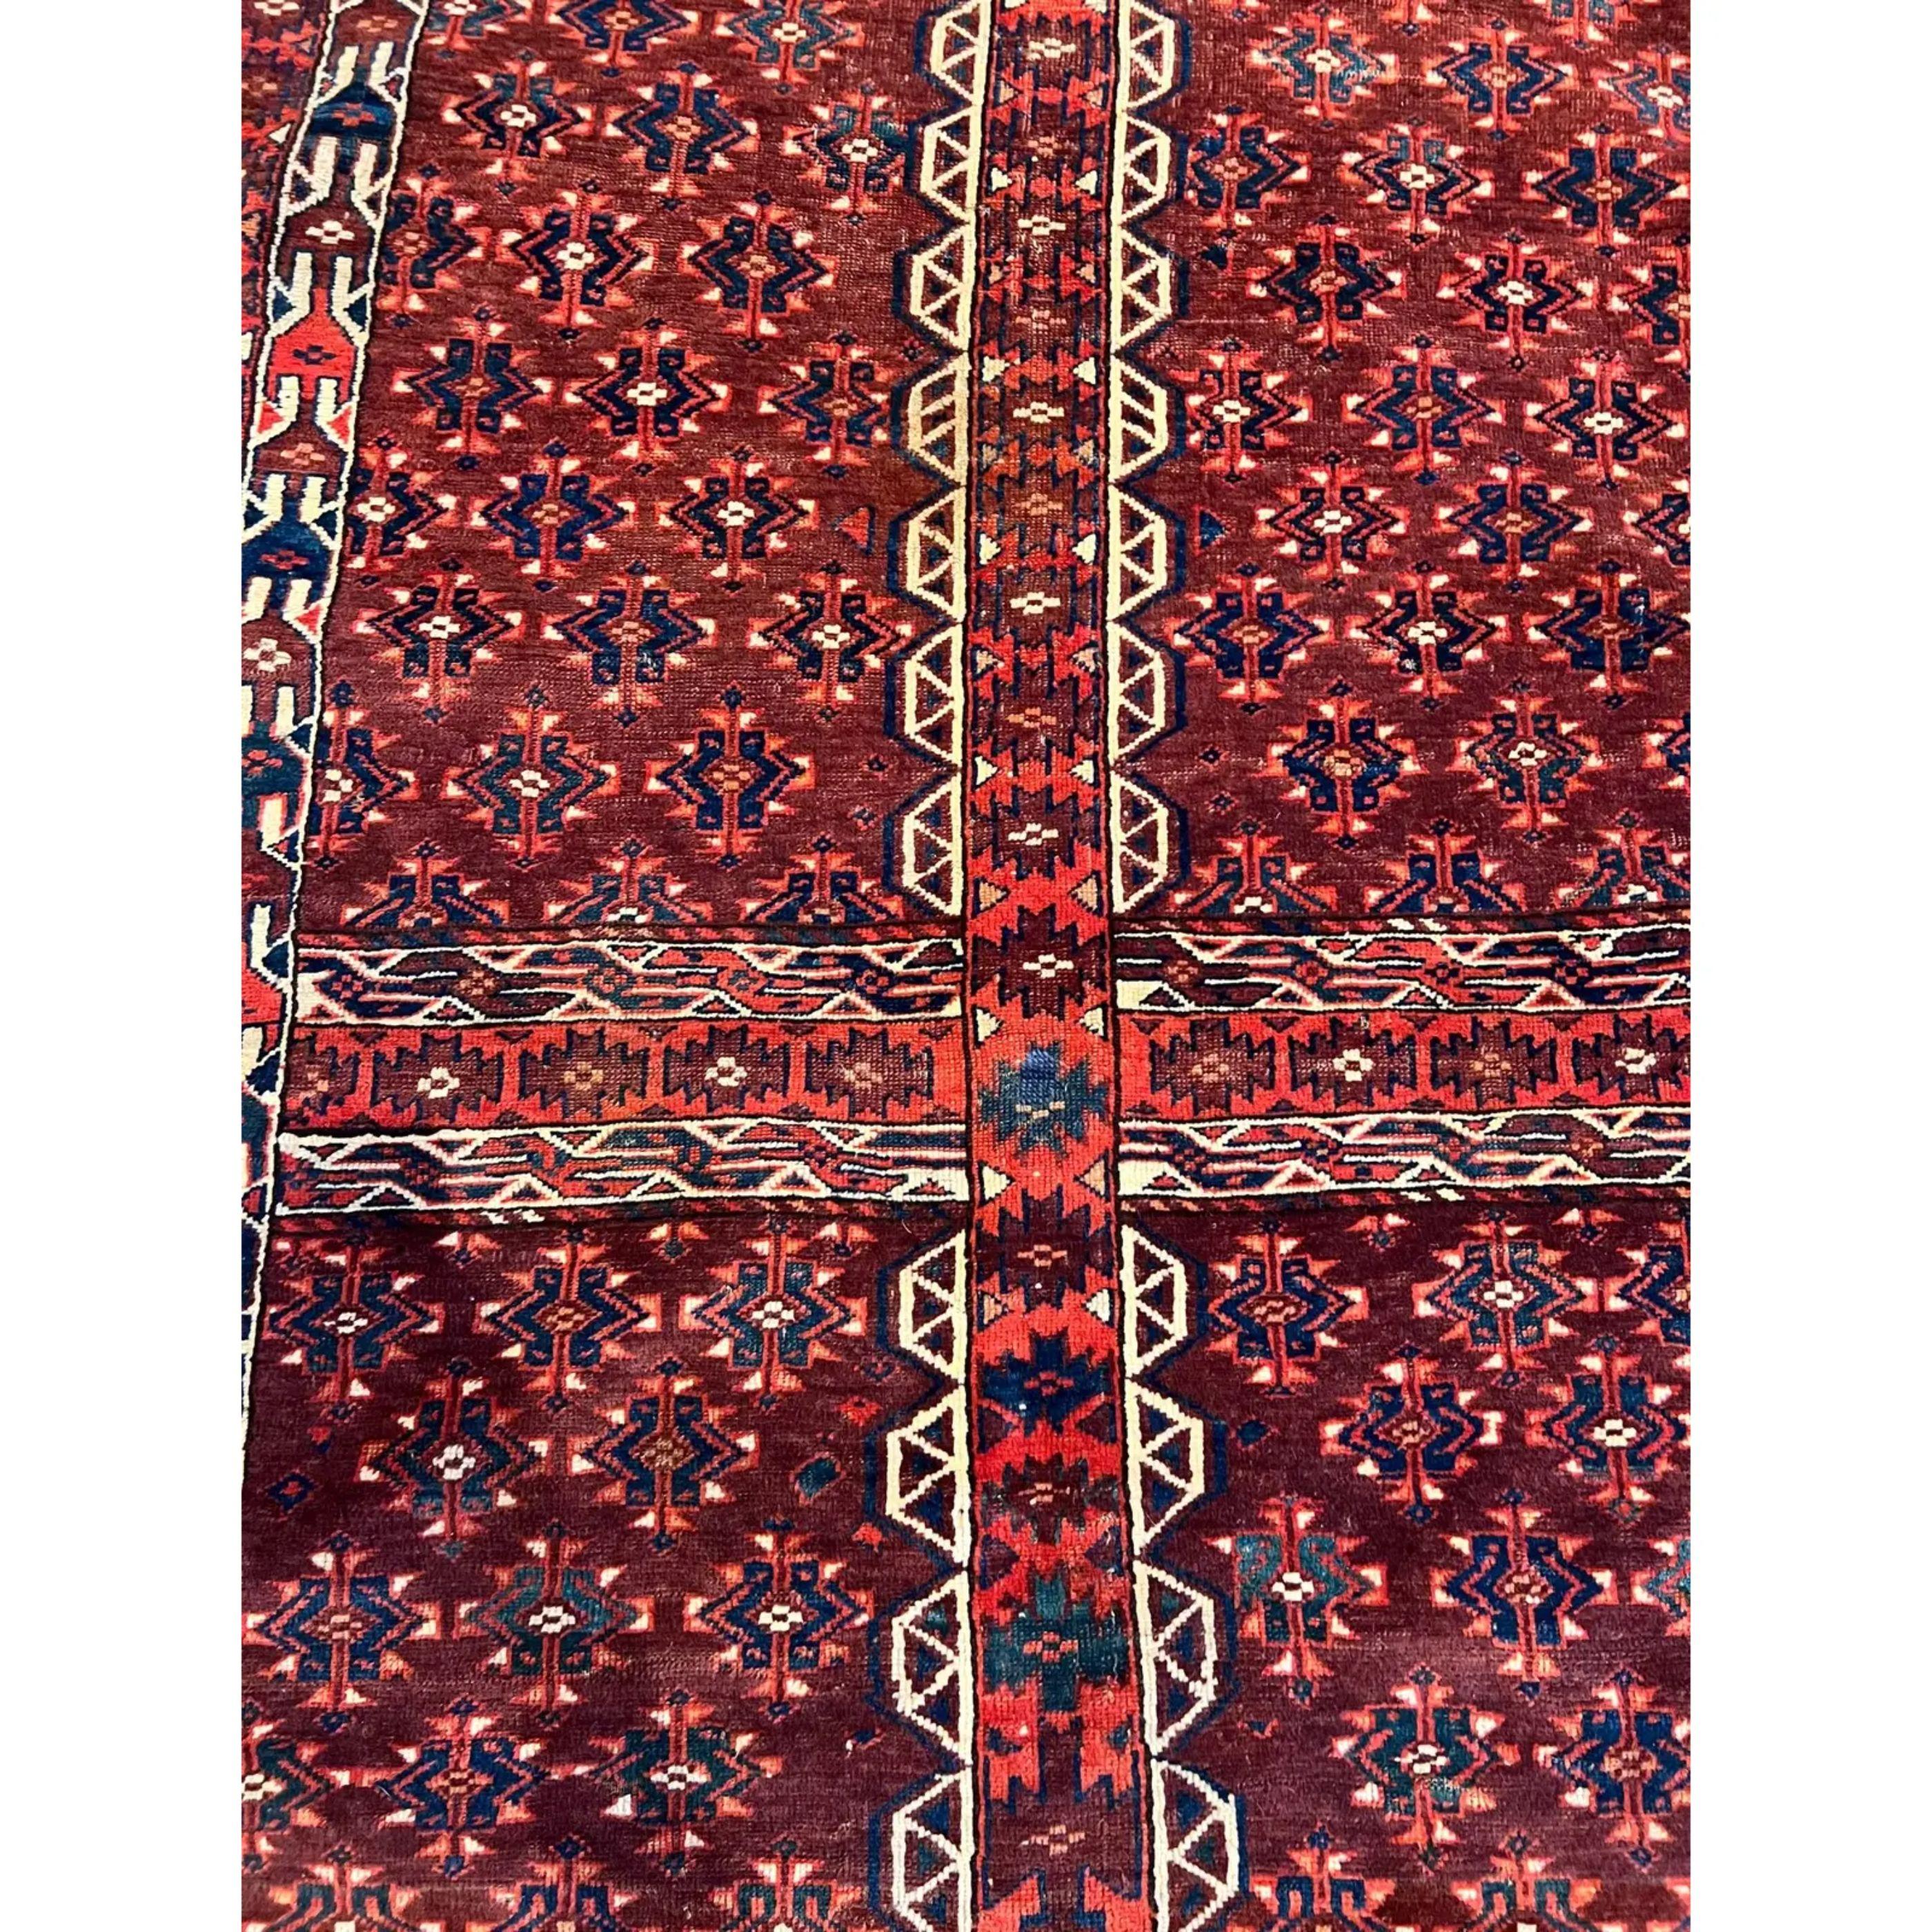 1900s Antique Hashlou Yomout Rug, handmade and hand-knotted